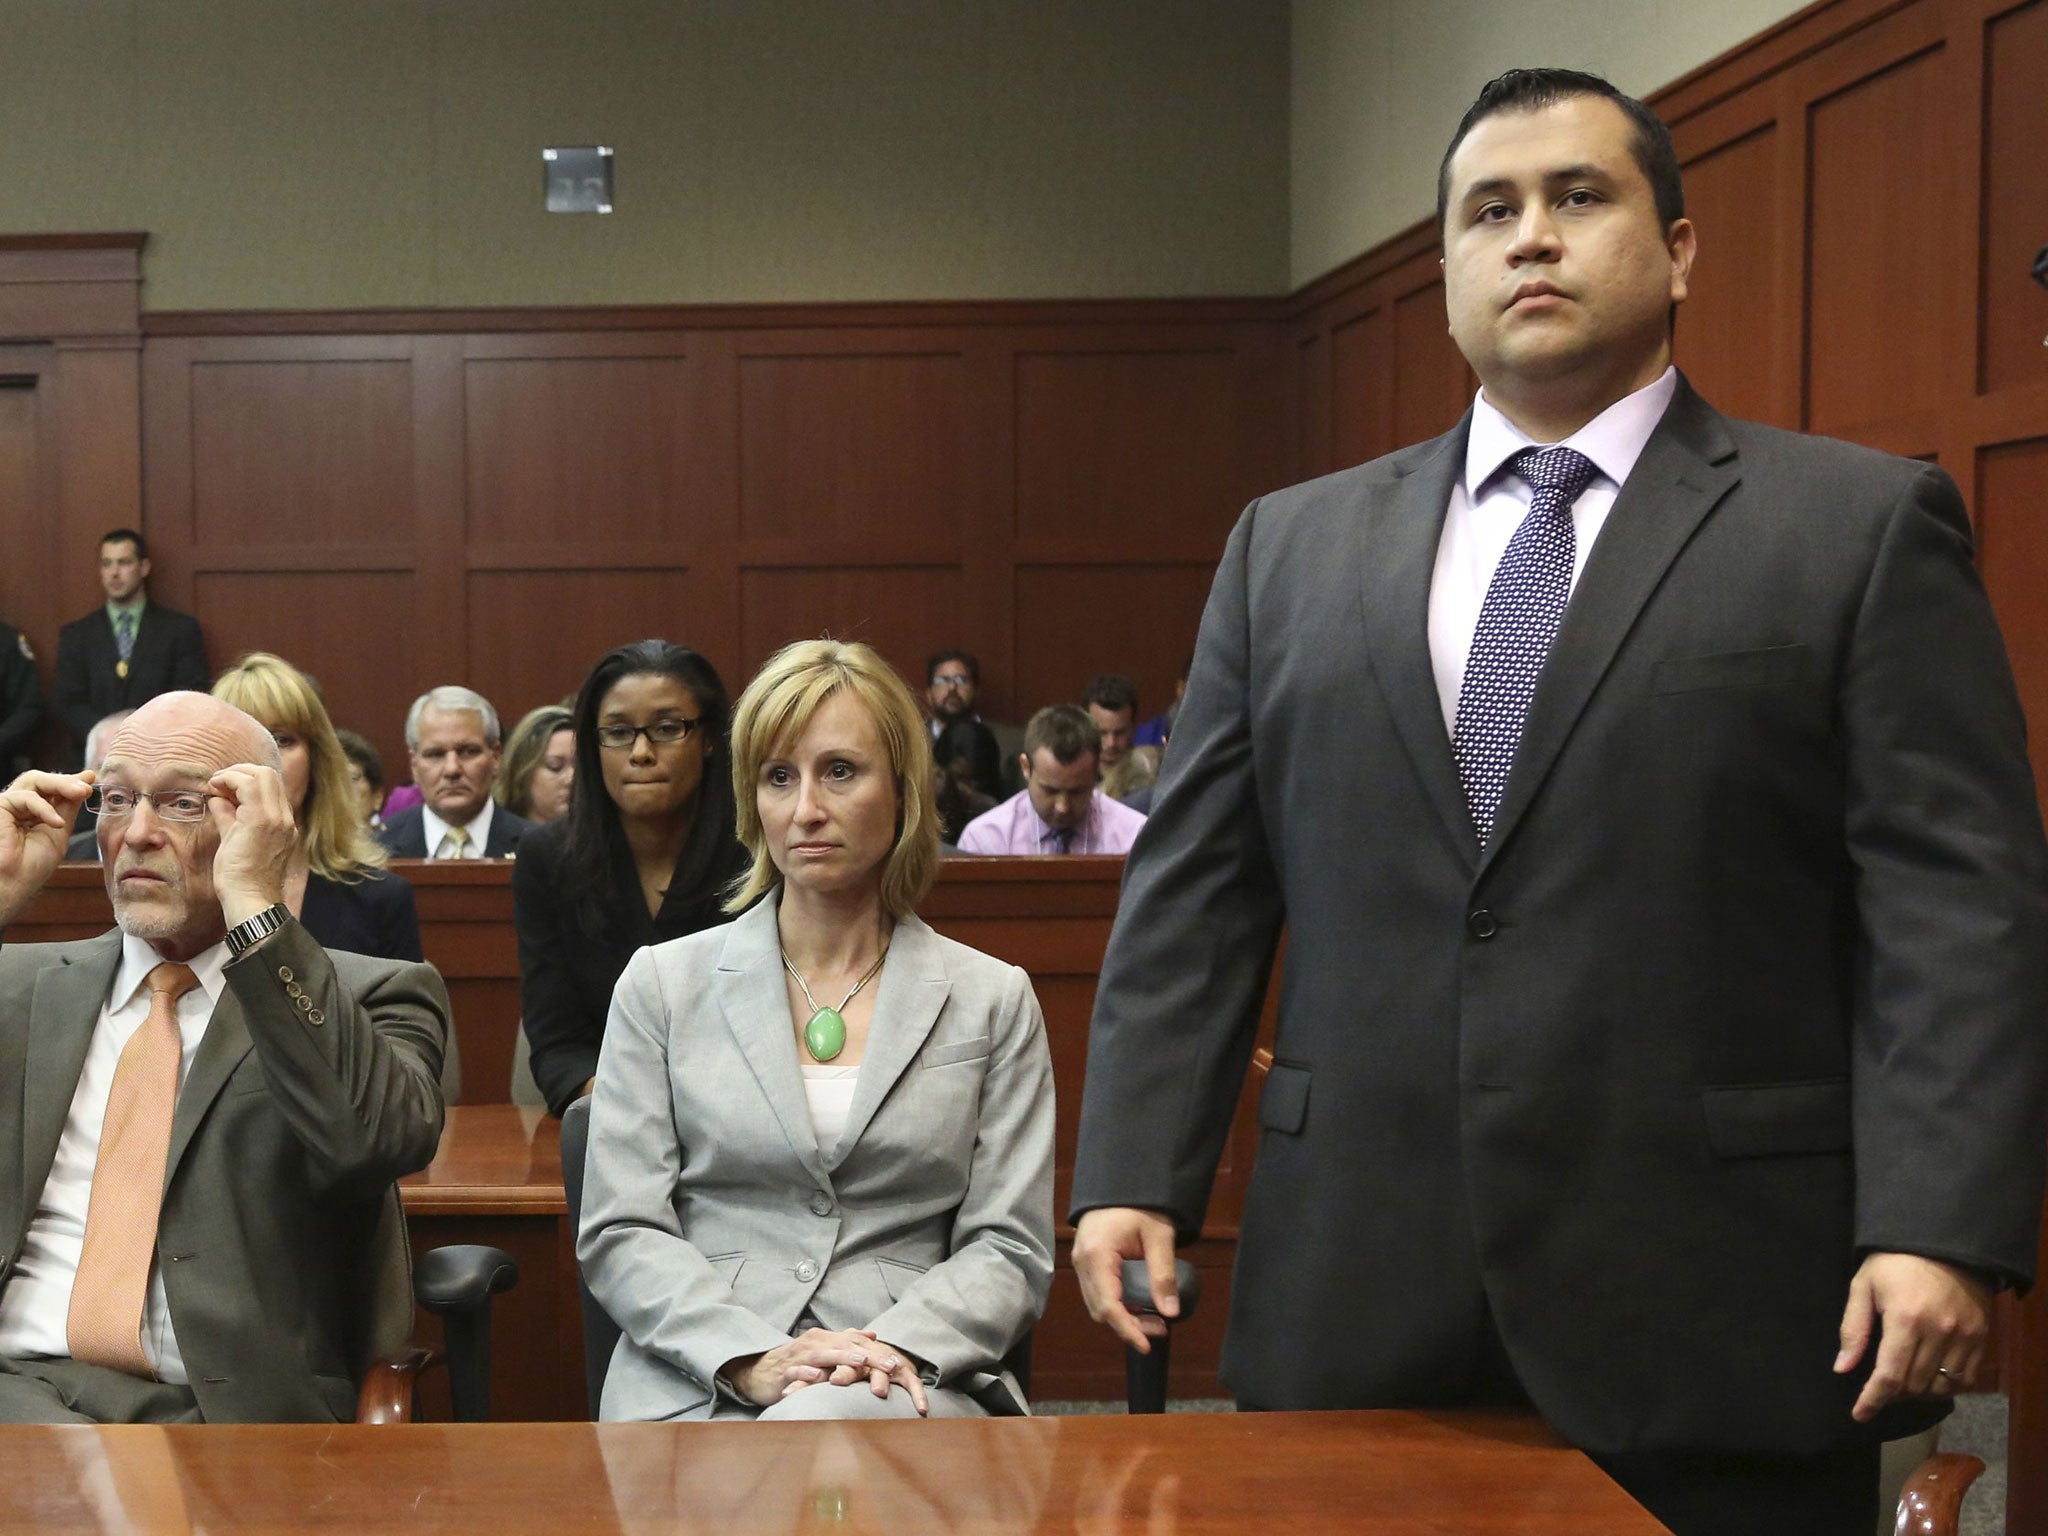 George Zimmerman stands when the jury arrives to deliver the verdict